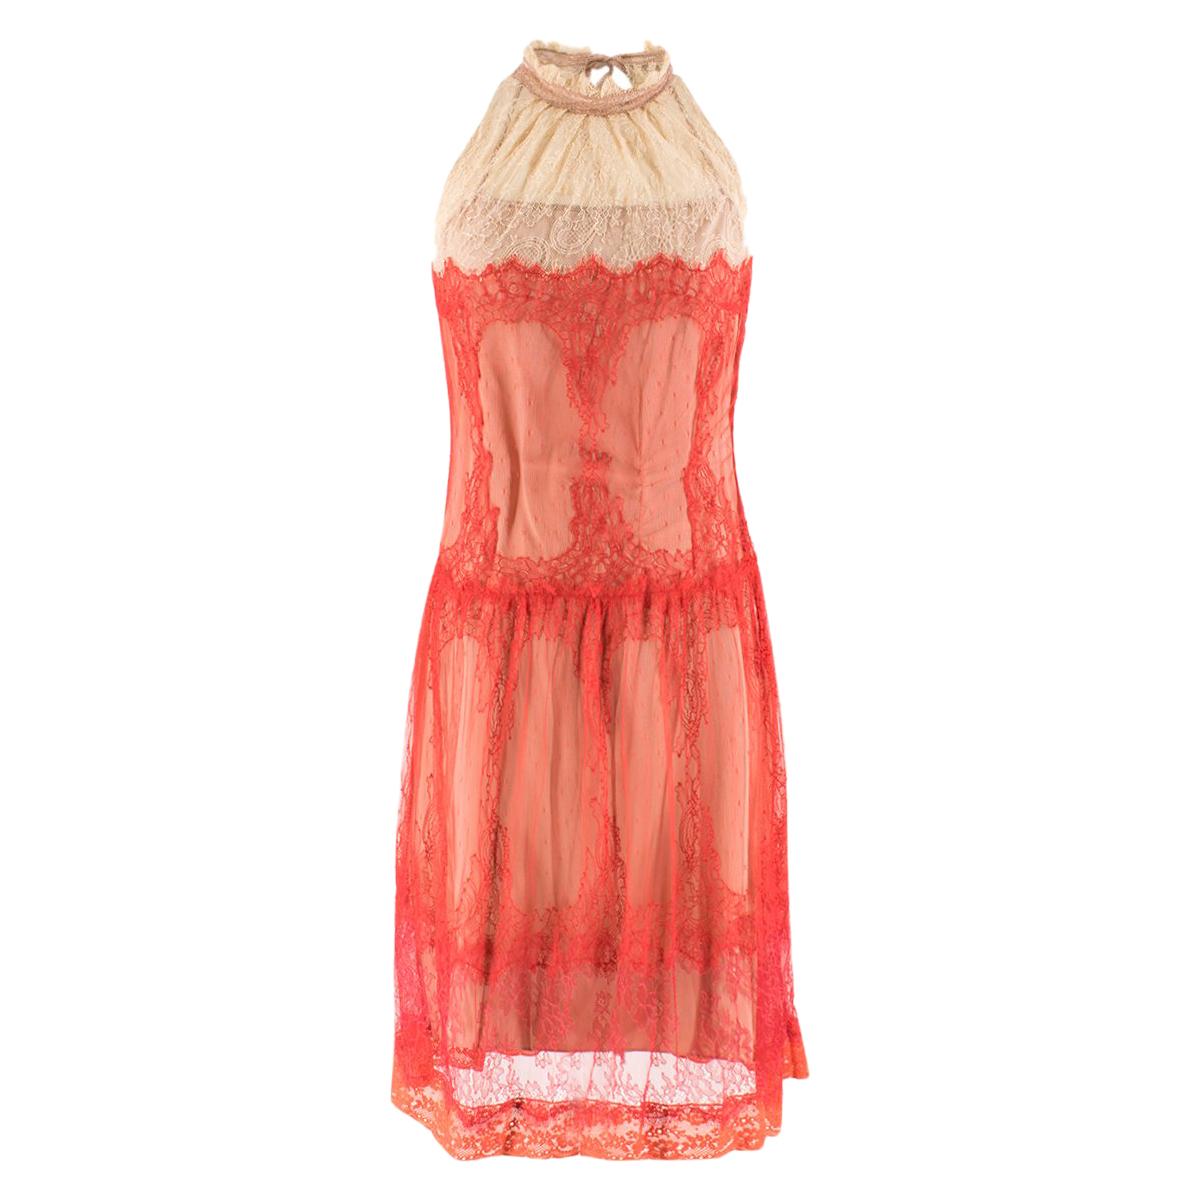 Alberta Ferretti Papaya-red Lace Dress 

- Papaya-red and cream Lace Dress 
- Ruffled neck collar, orange hem
-Detachable sand silk slip to line
- Beige ties fastening back of neck
- Concealed hook and zip fastening at side

Please note, these items